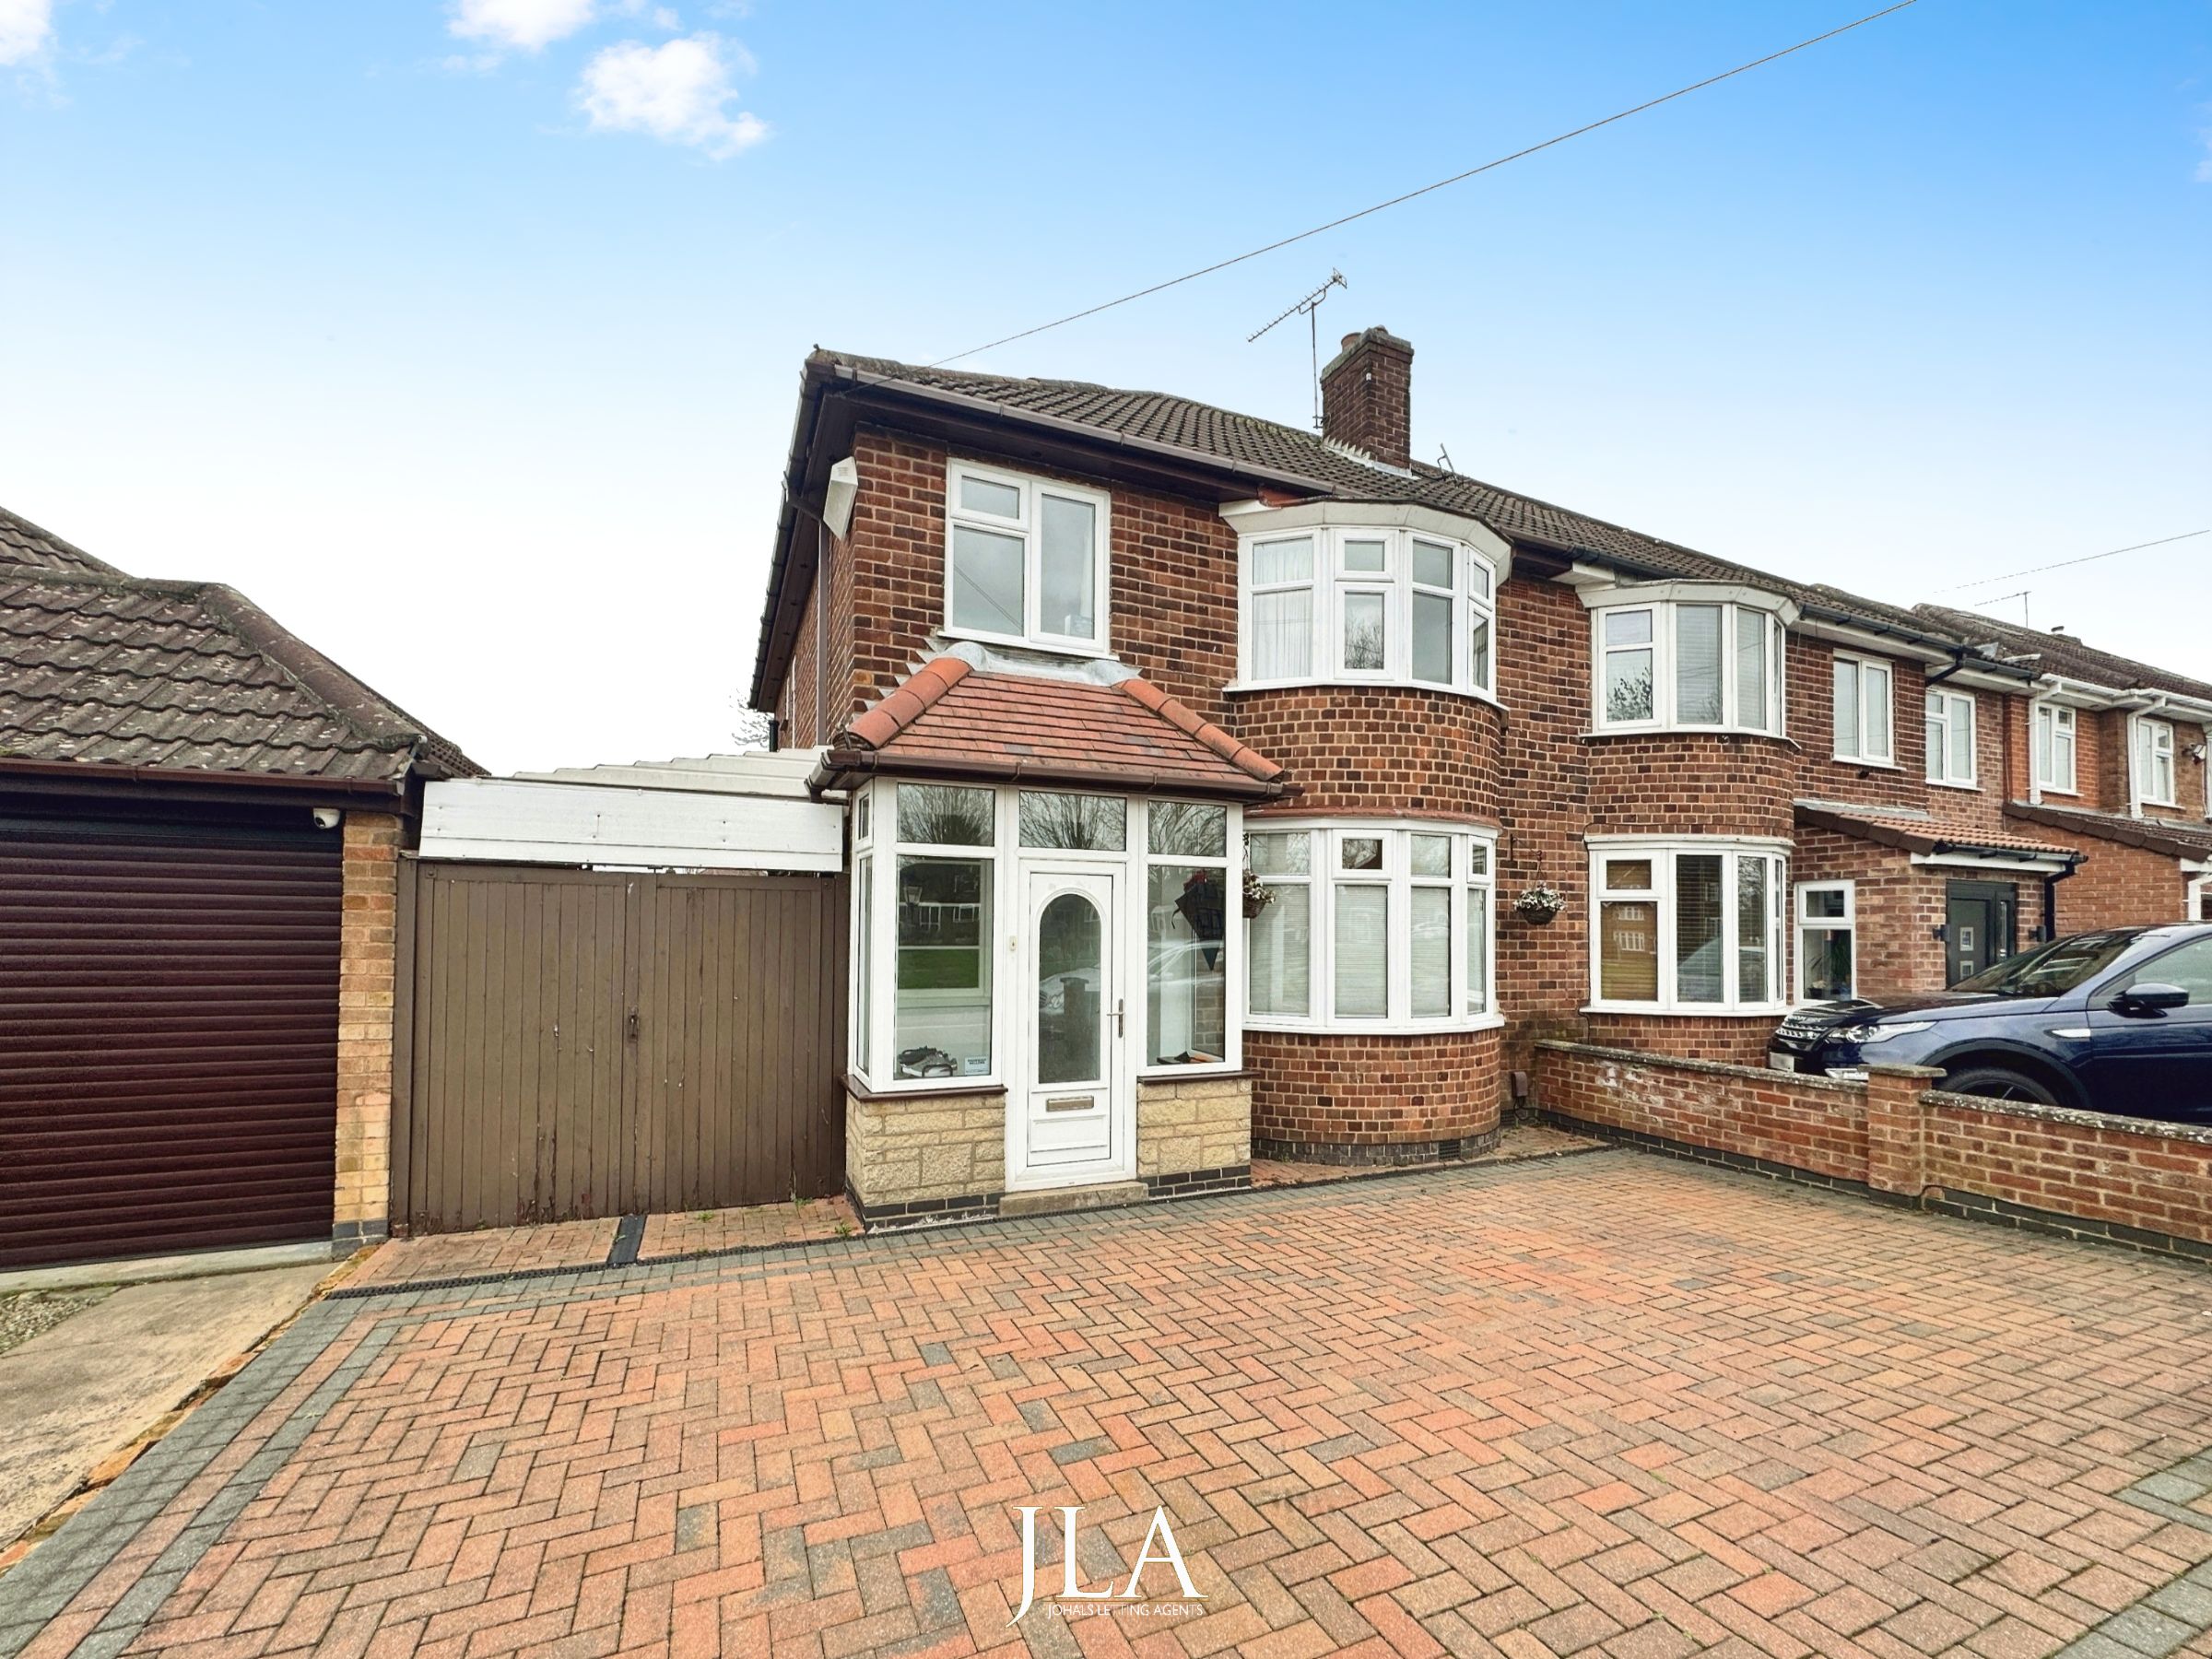 3 bed semi-detached house to rent in Kingsway, Leicester, LE3 